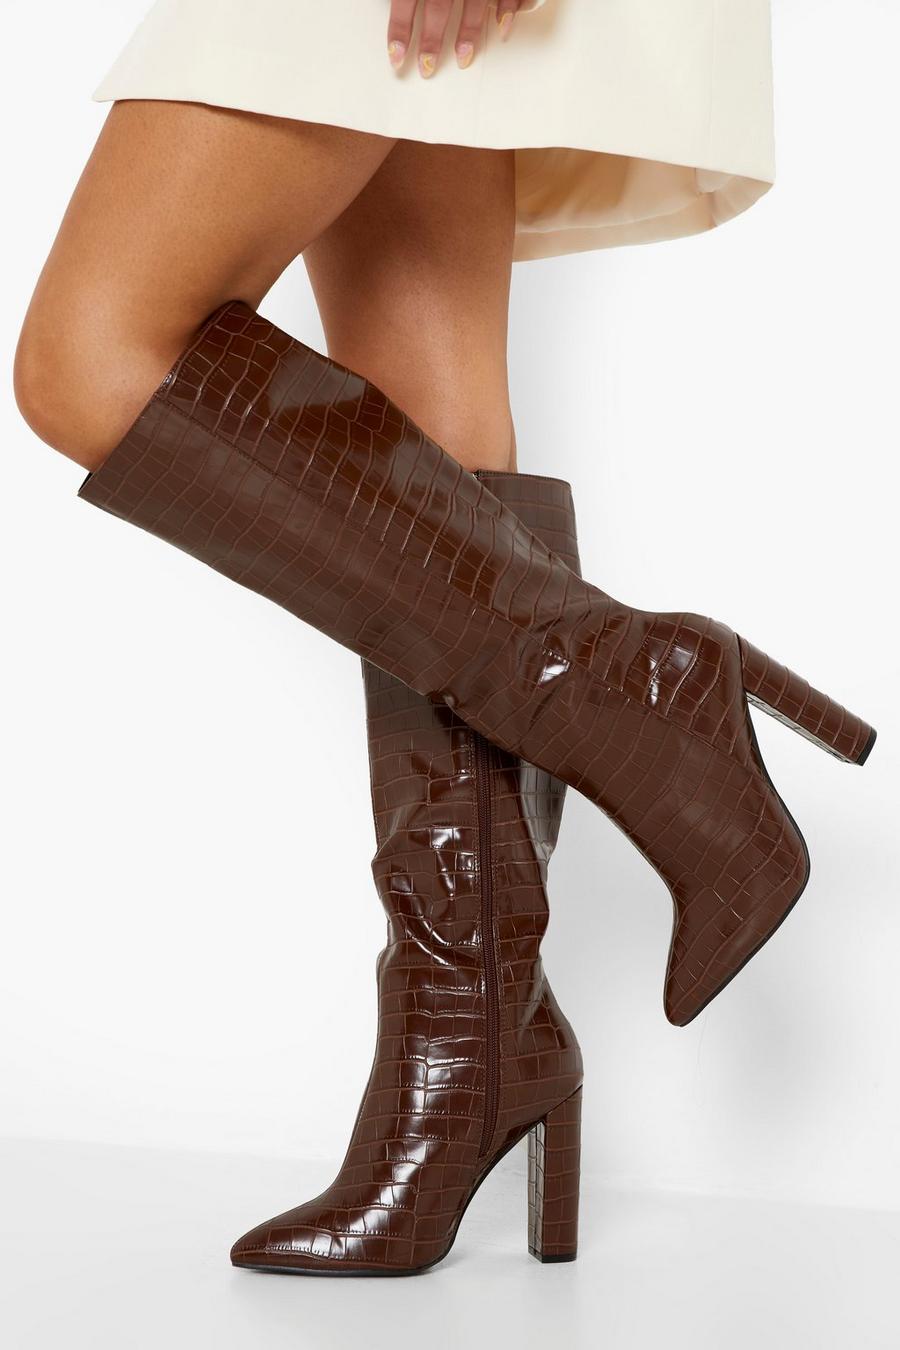 Chocolate brown Wide Width Pointed Toe Croc Knee High Boots